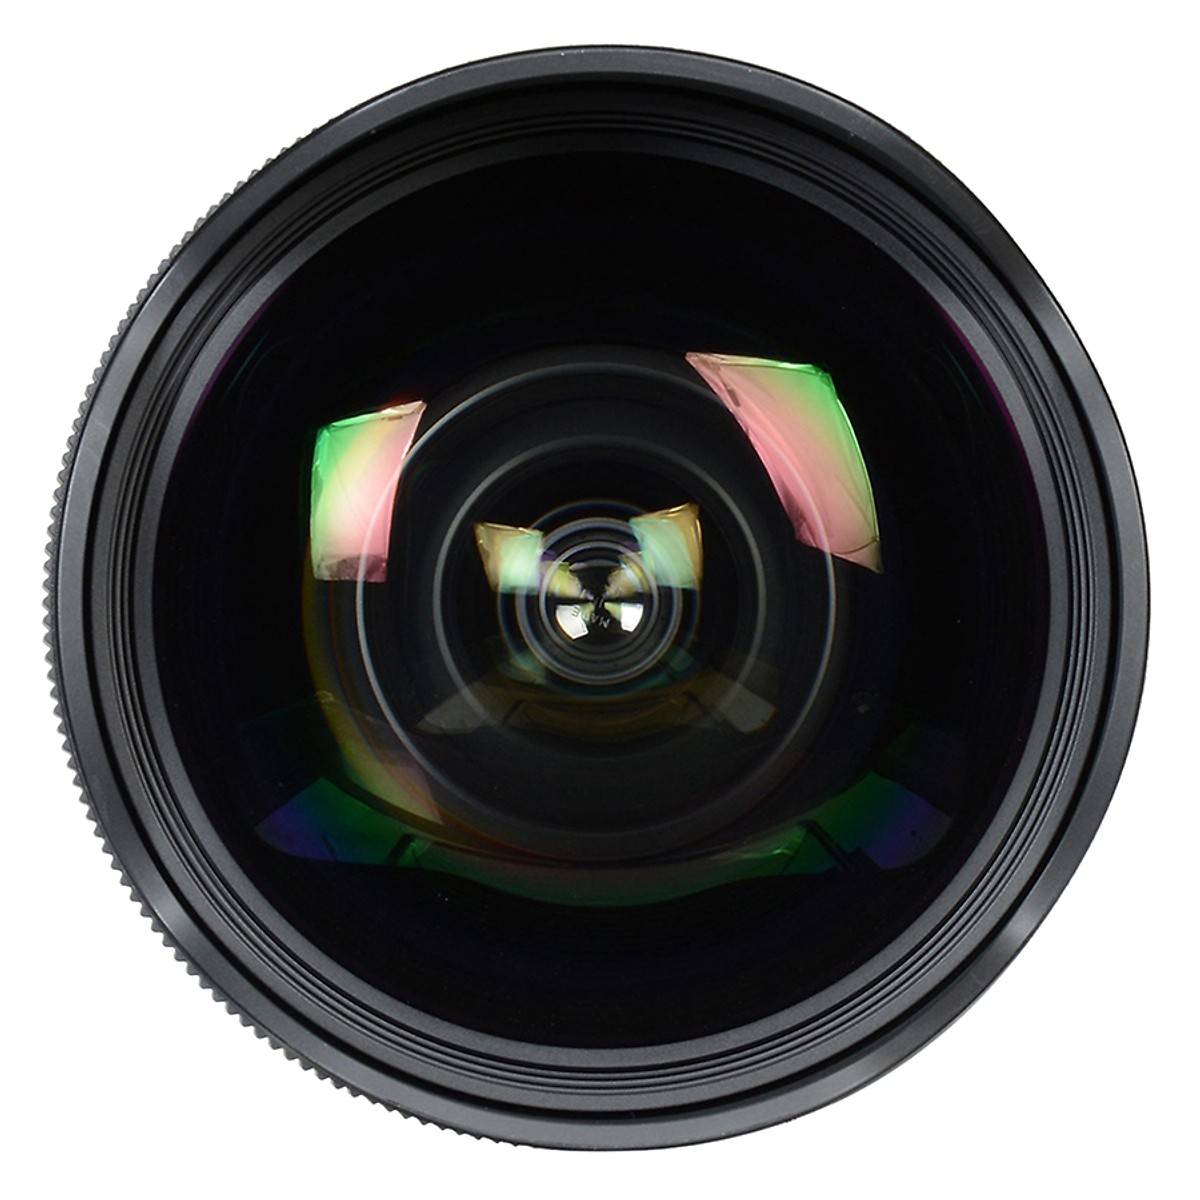 ong kinh sigma 14mm f18 dg hsm art for canon 1